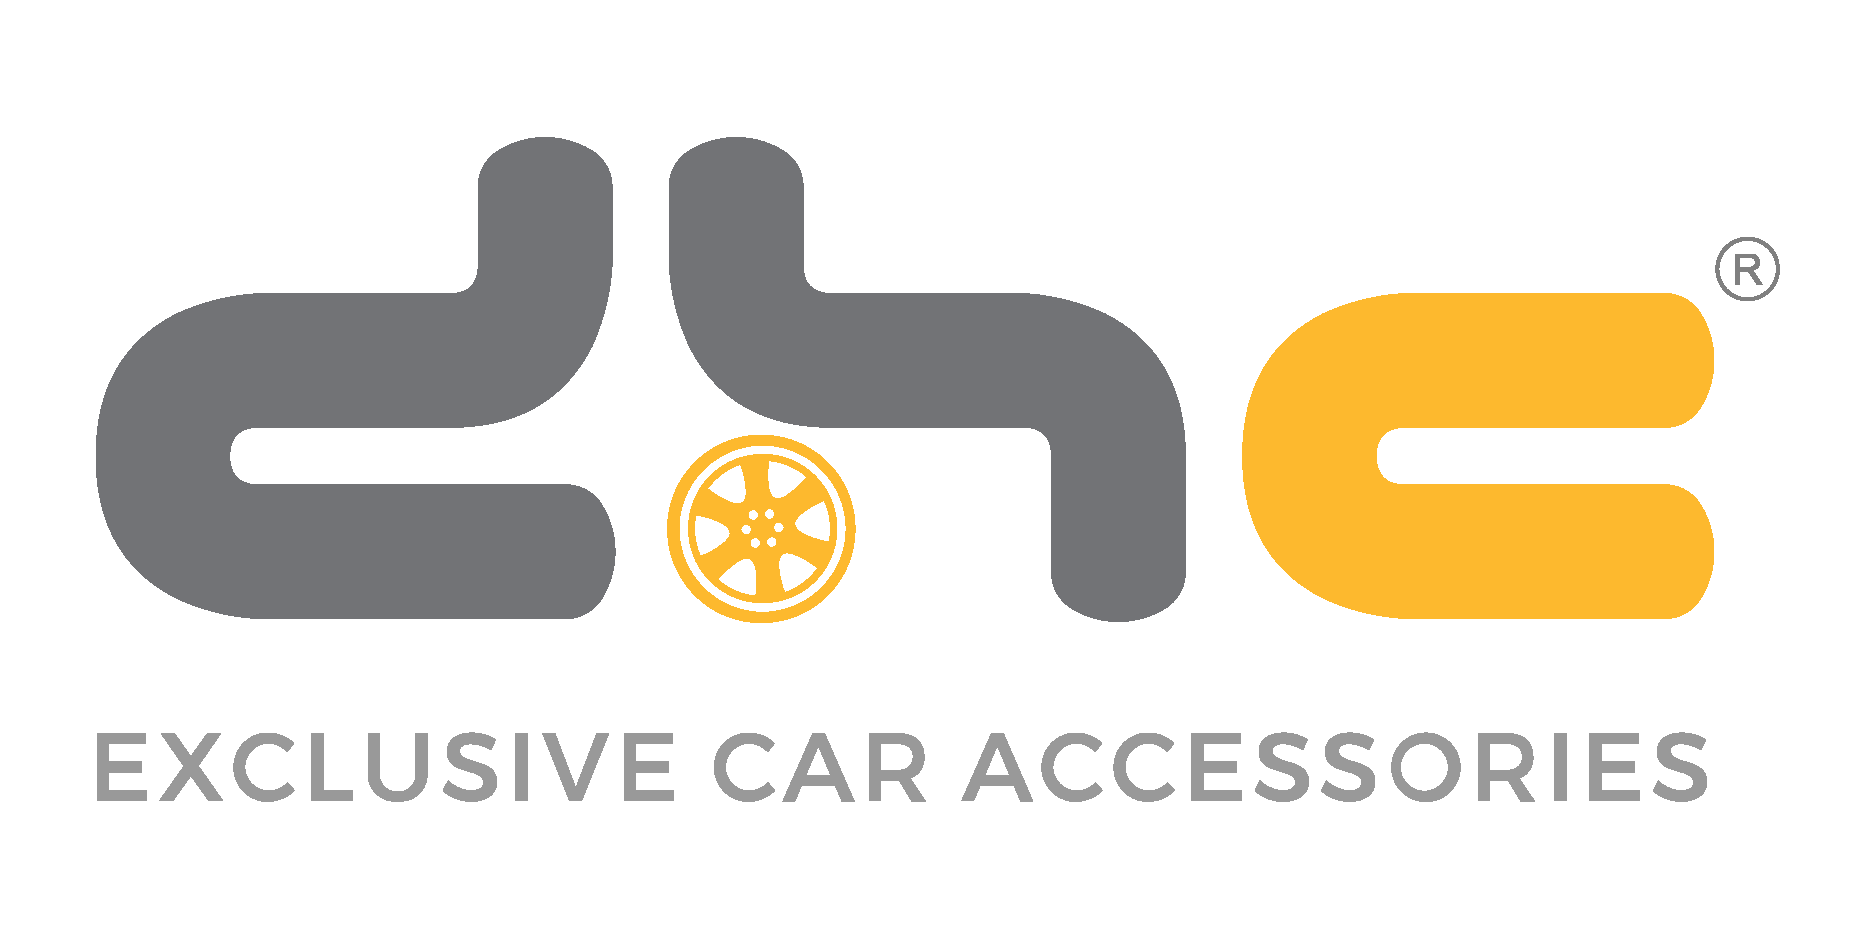 dhc   exclusive car accessorie Logo Vector.svg